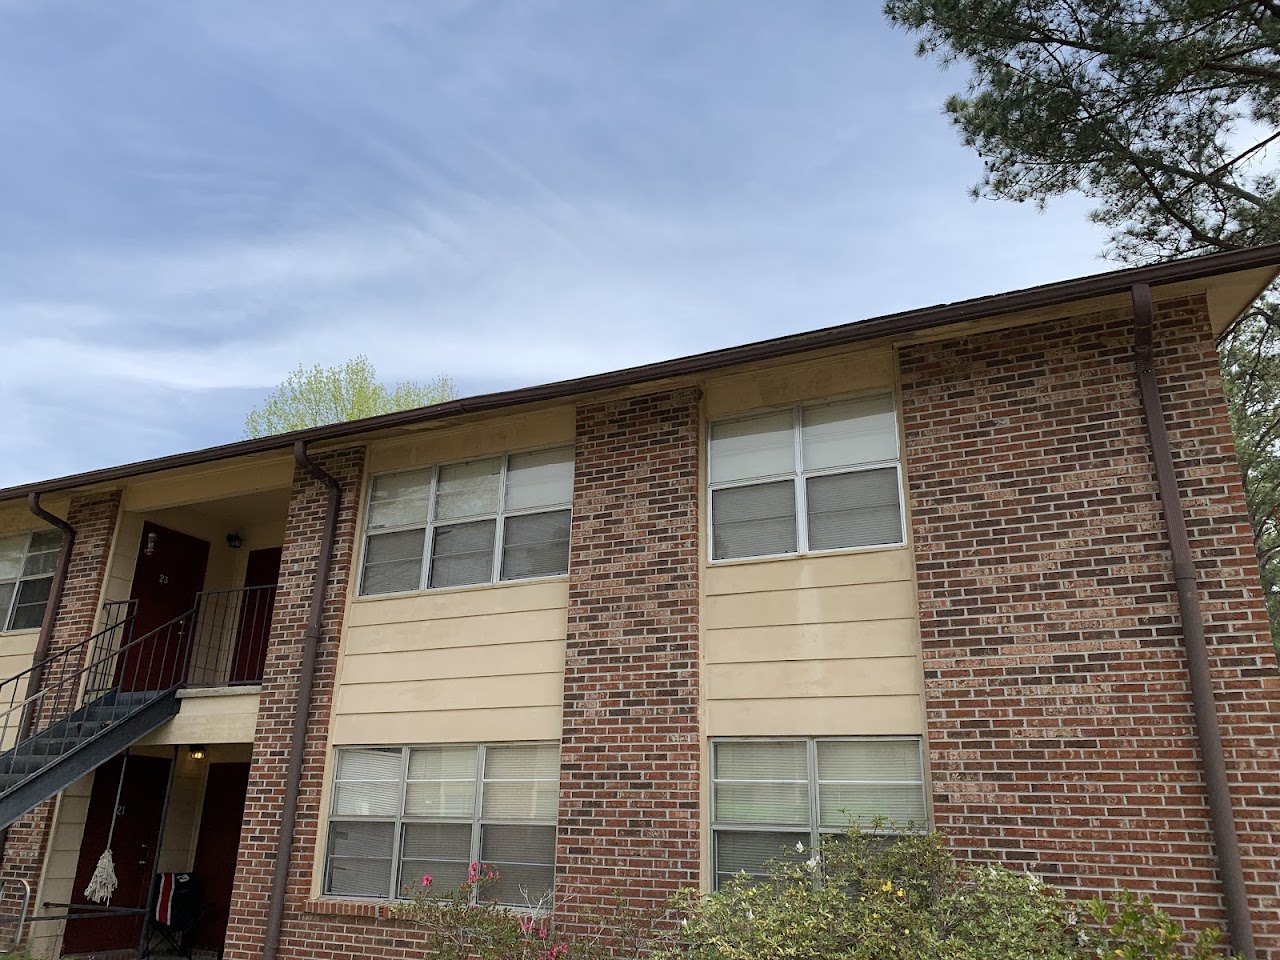 Photo of ELMWOOD APTS. Affordable housing located at 106 MIZE ST ELLISVILLE, MS 39437